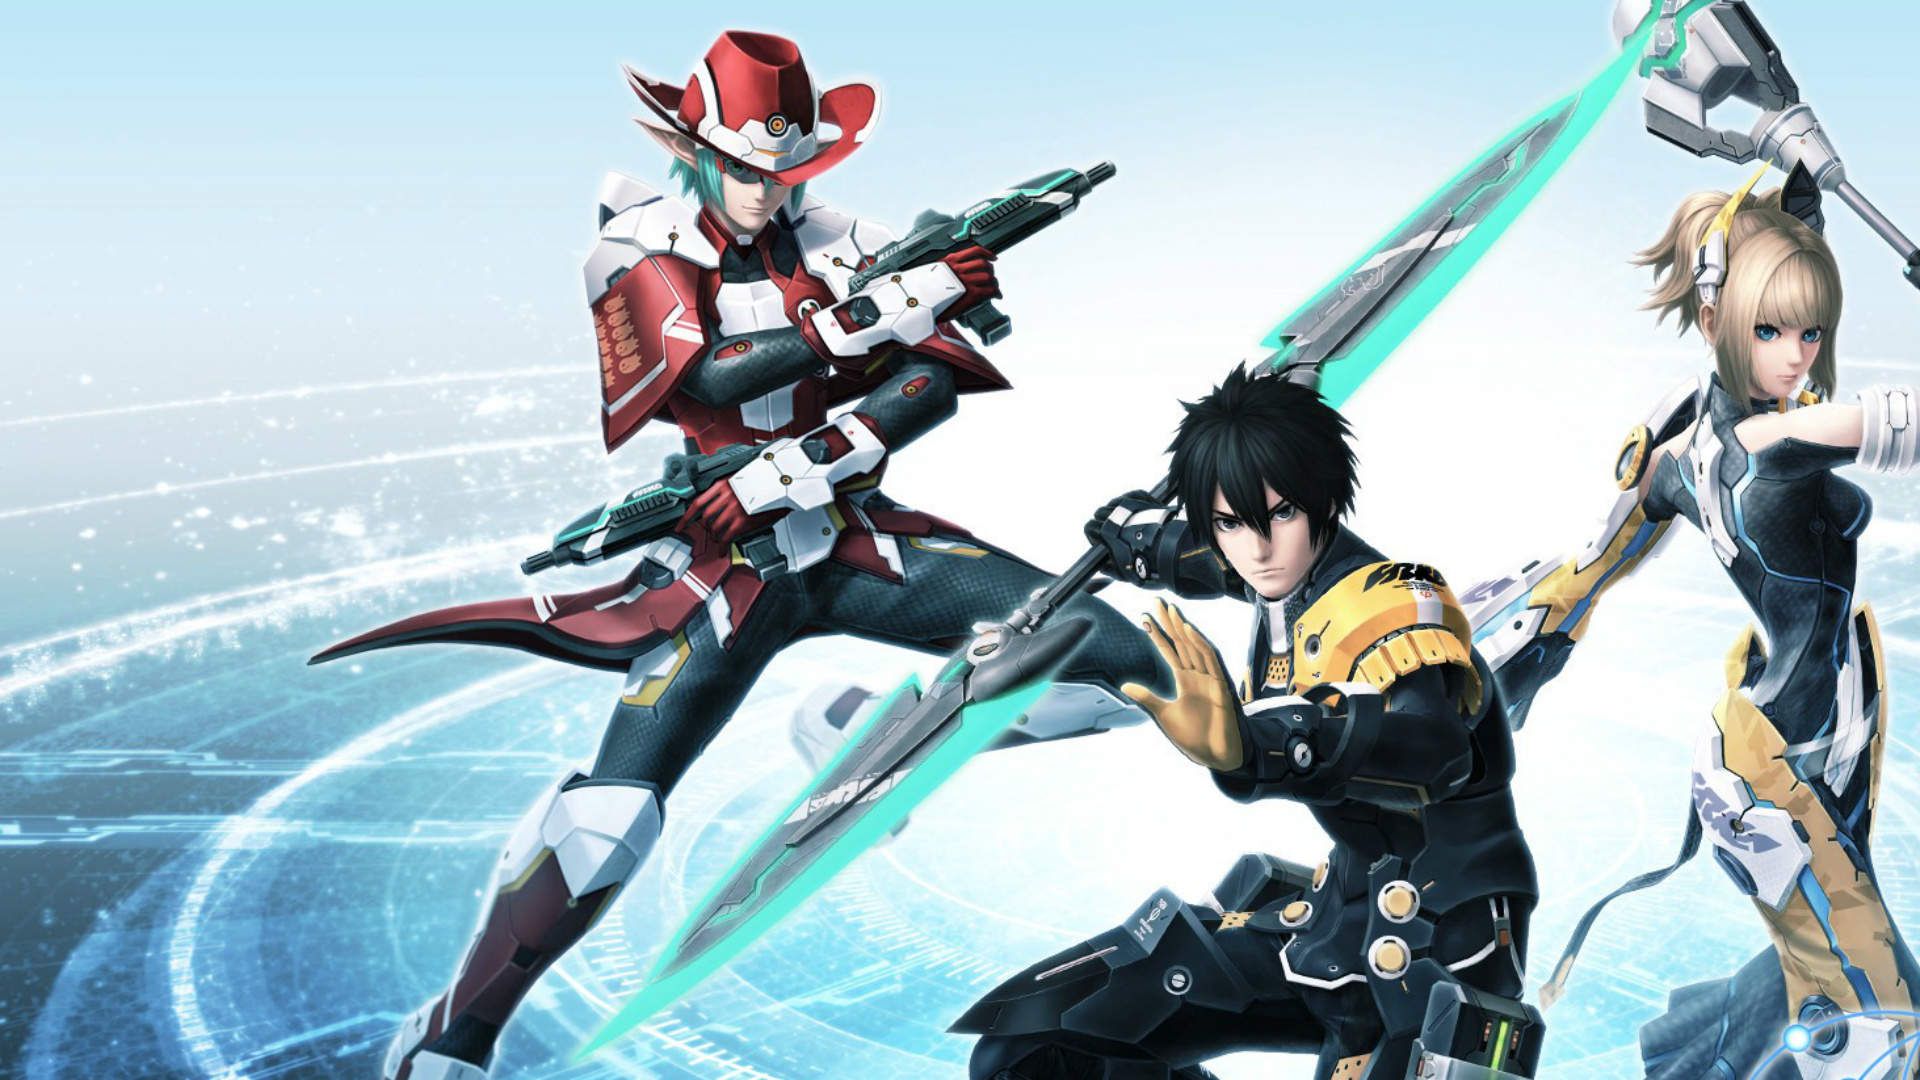 PSO2 guide: 12 Phantasy Star Online 2 tips to get you started